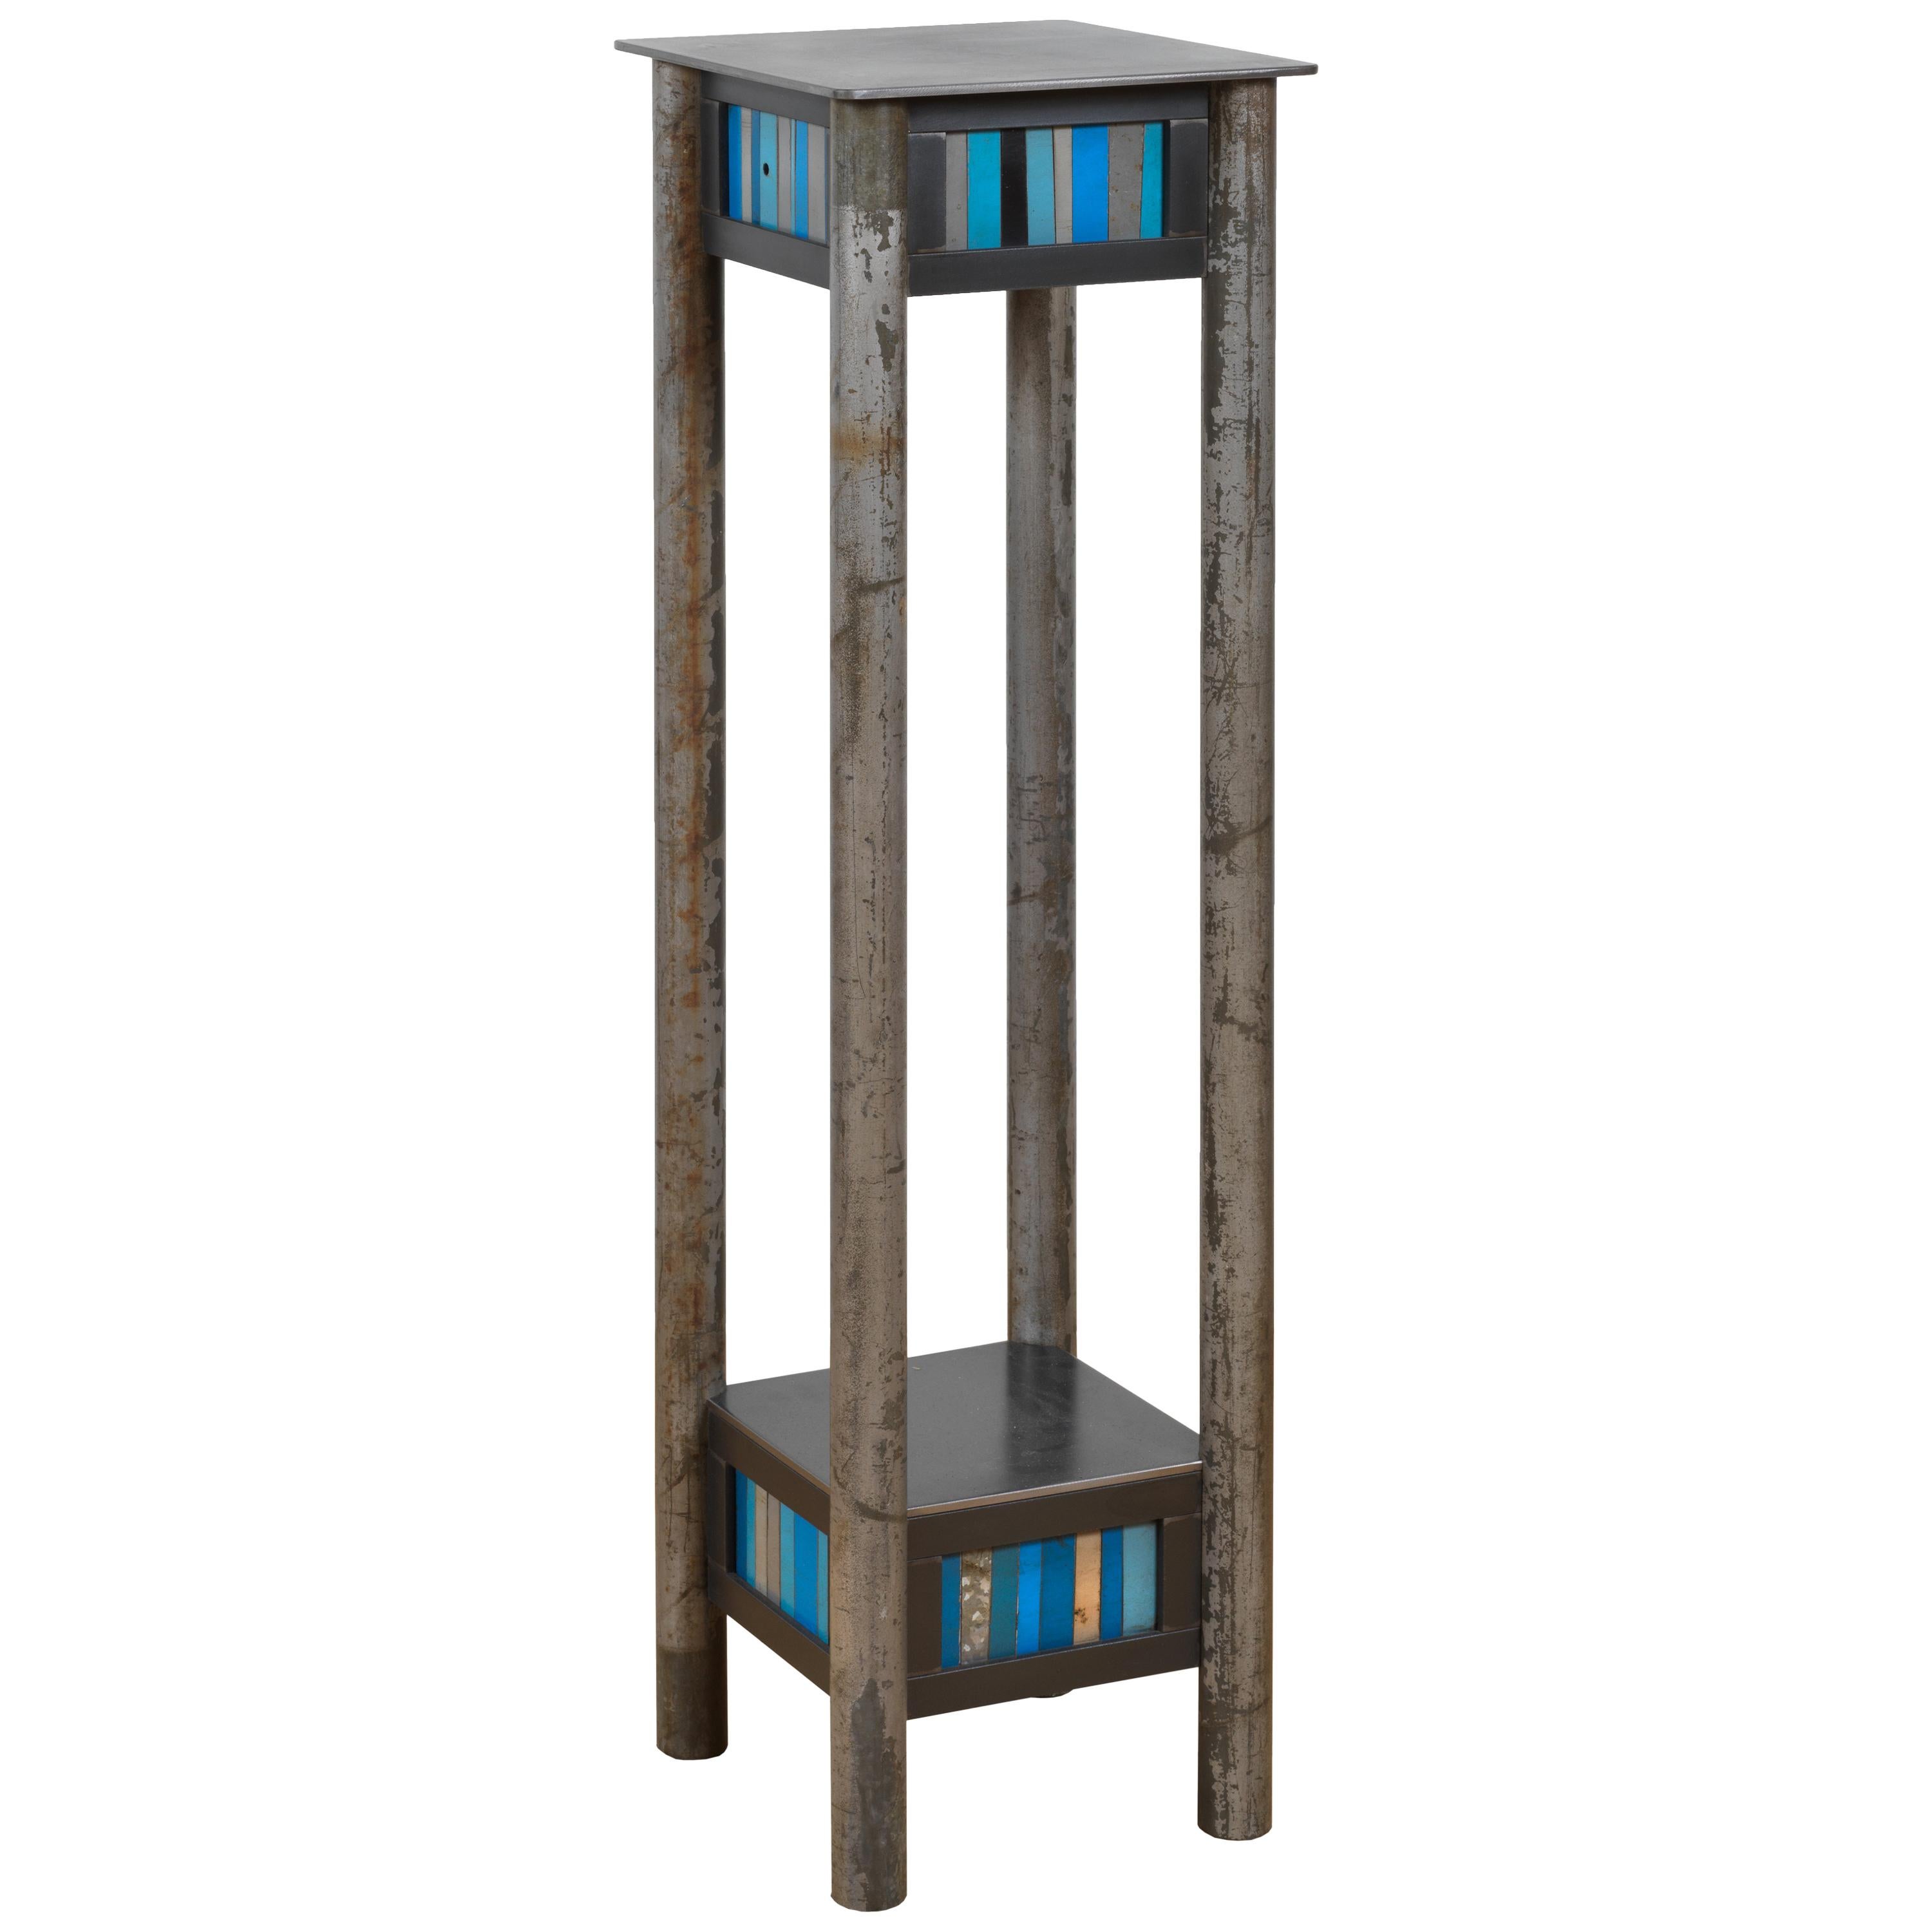 Jim Rose Welded Steel and Found Painted Steel Pedestal Square Top with Shelf